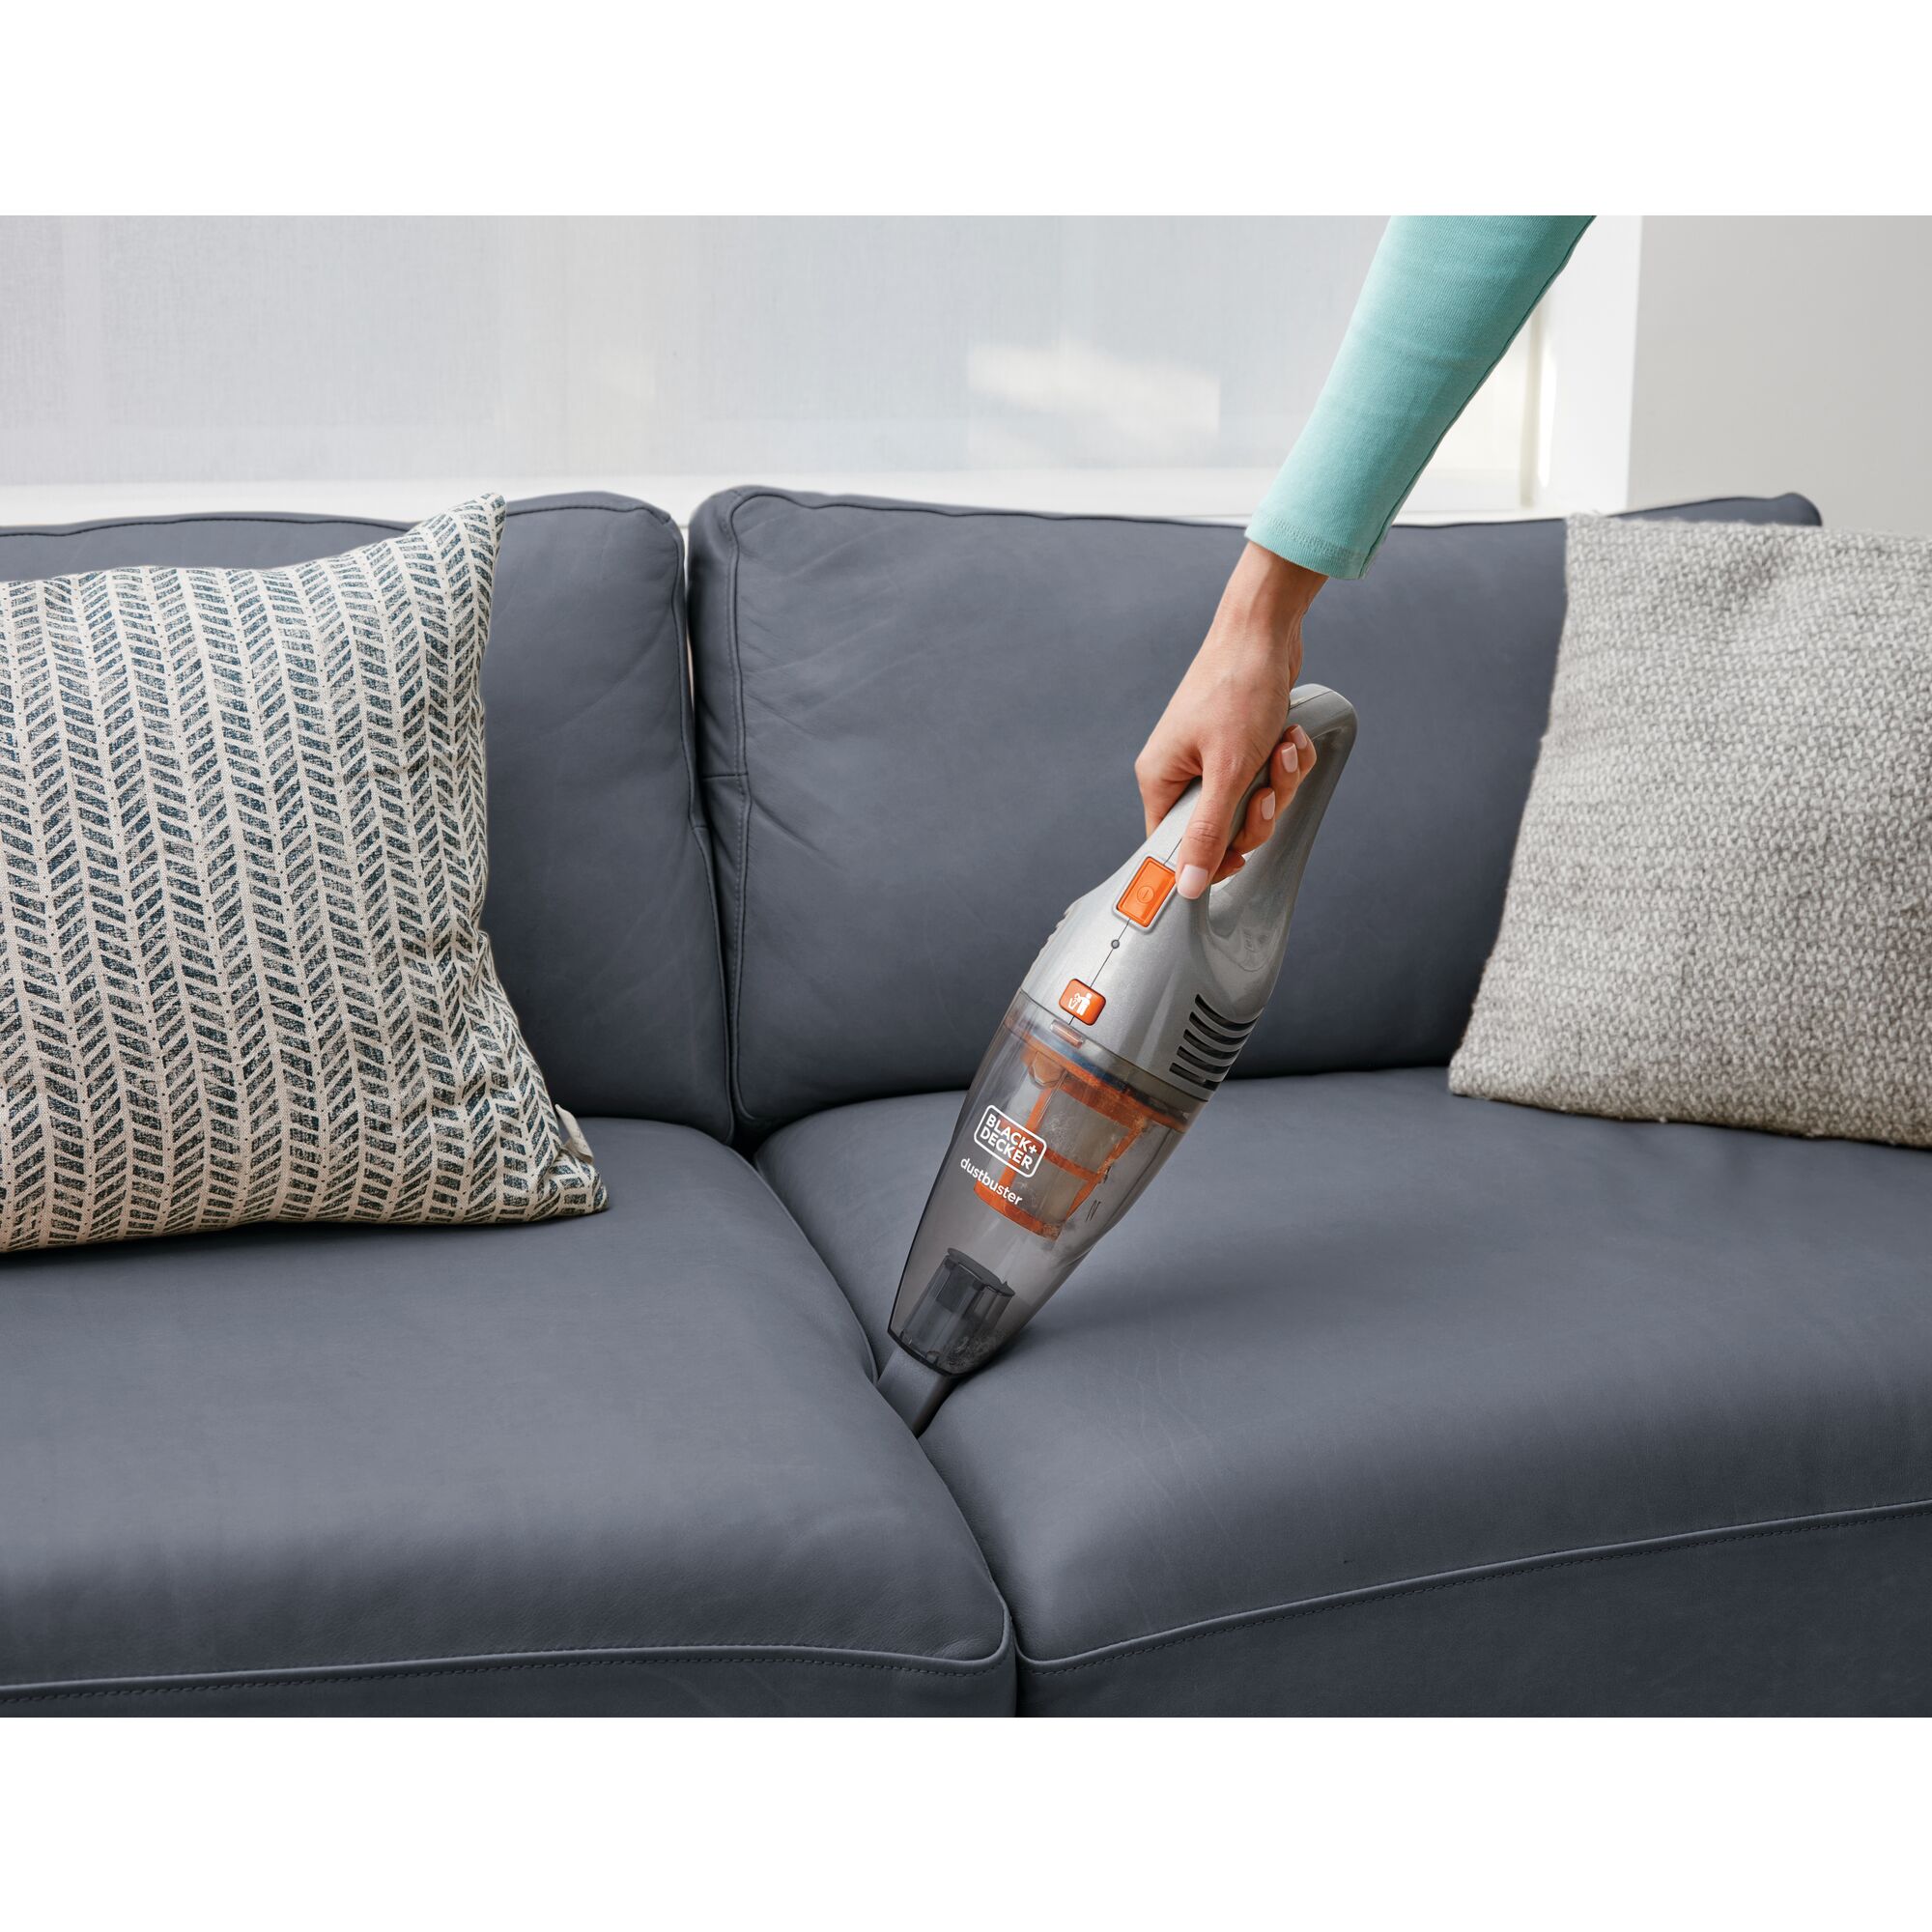 POWER SERIES 2 in 1 Cordless Stick Vacuum being used in between sofa cushions.